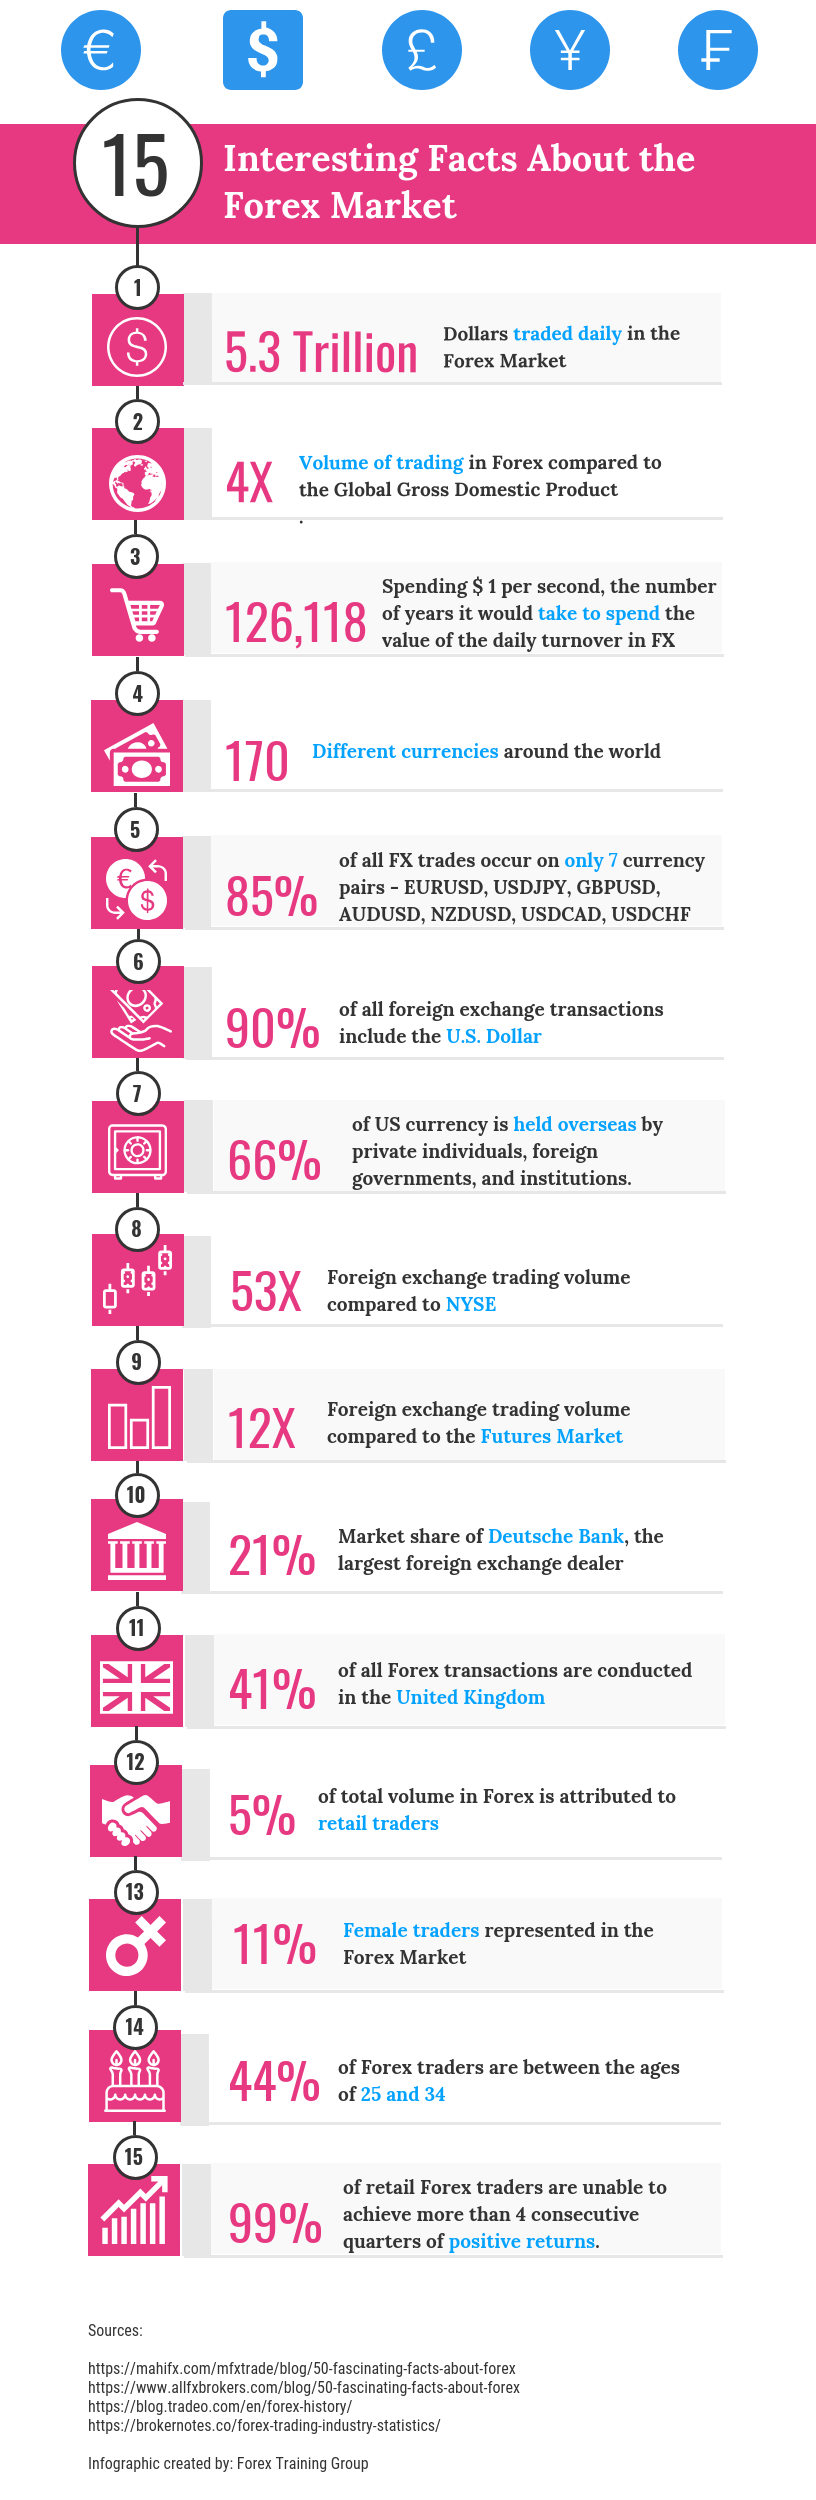 15 Interesting Facts About the Forex Market - Infographic